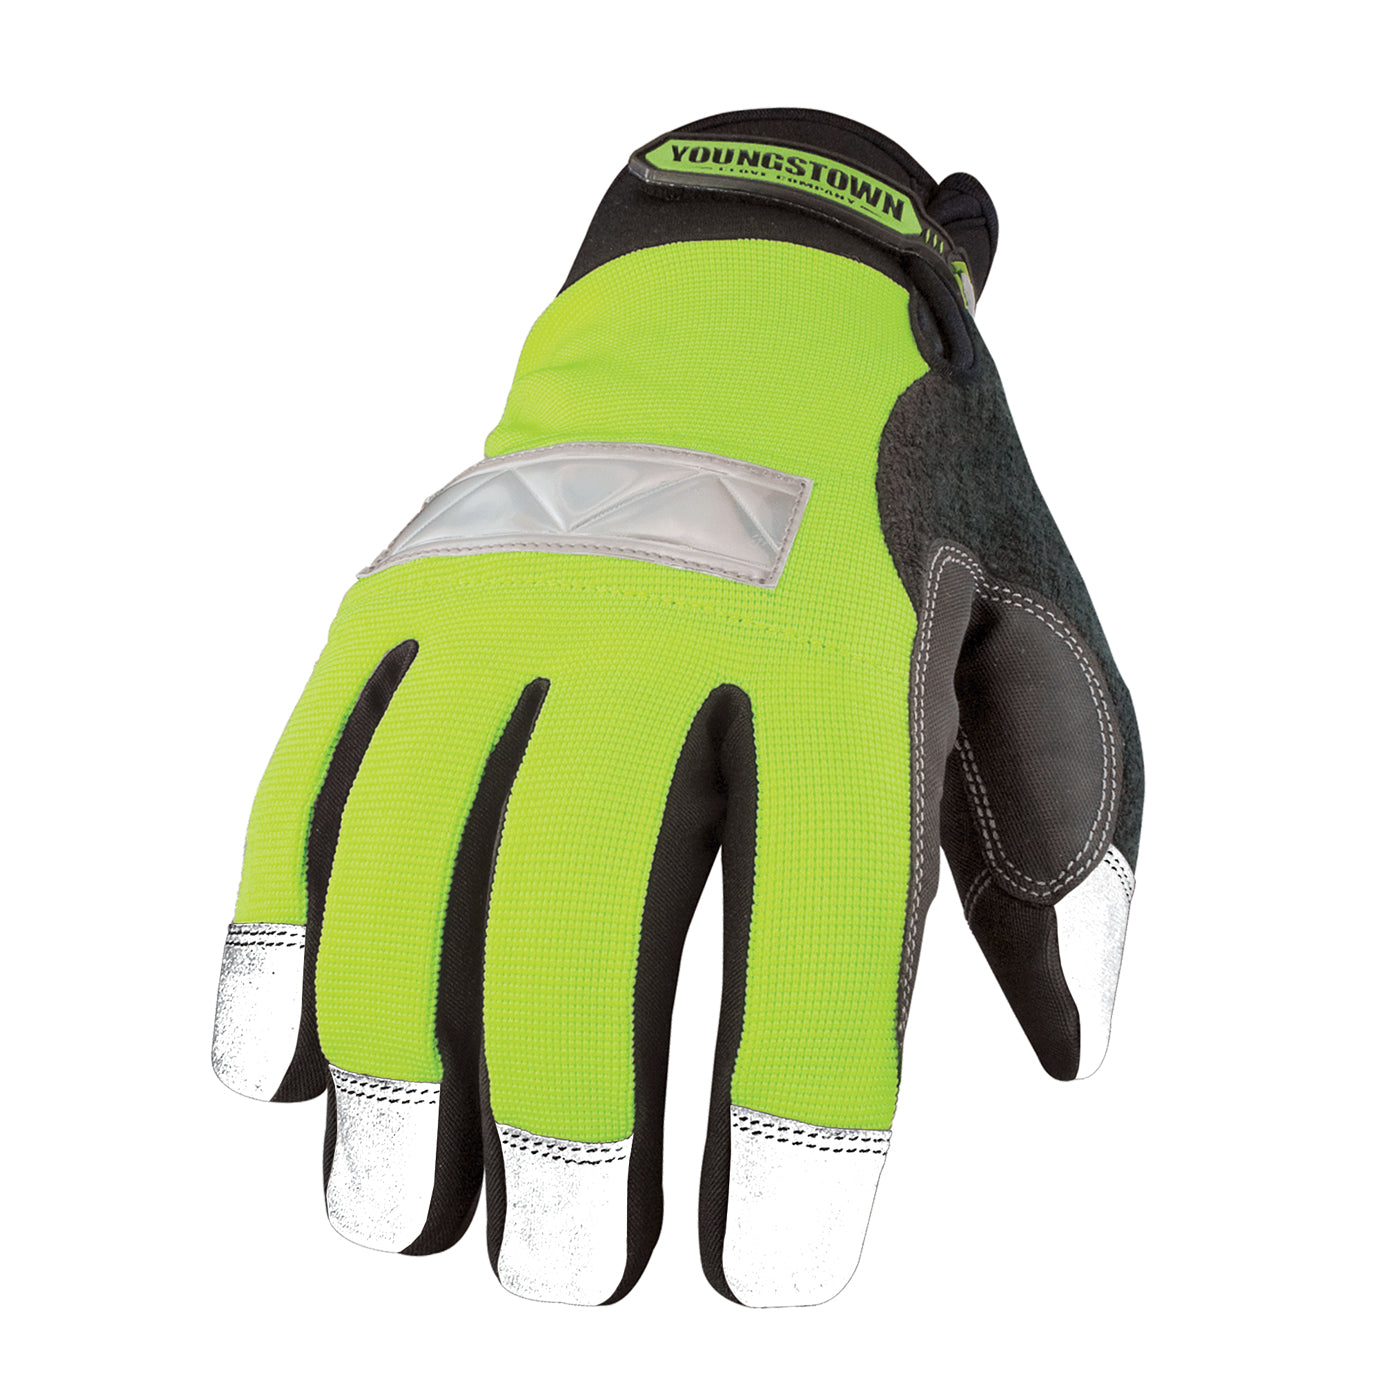 08-3710-10 Youngstown Safety Lime Winter Glove - Main image